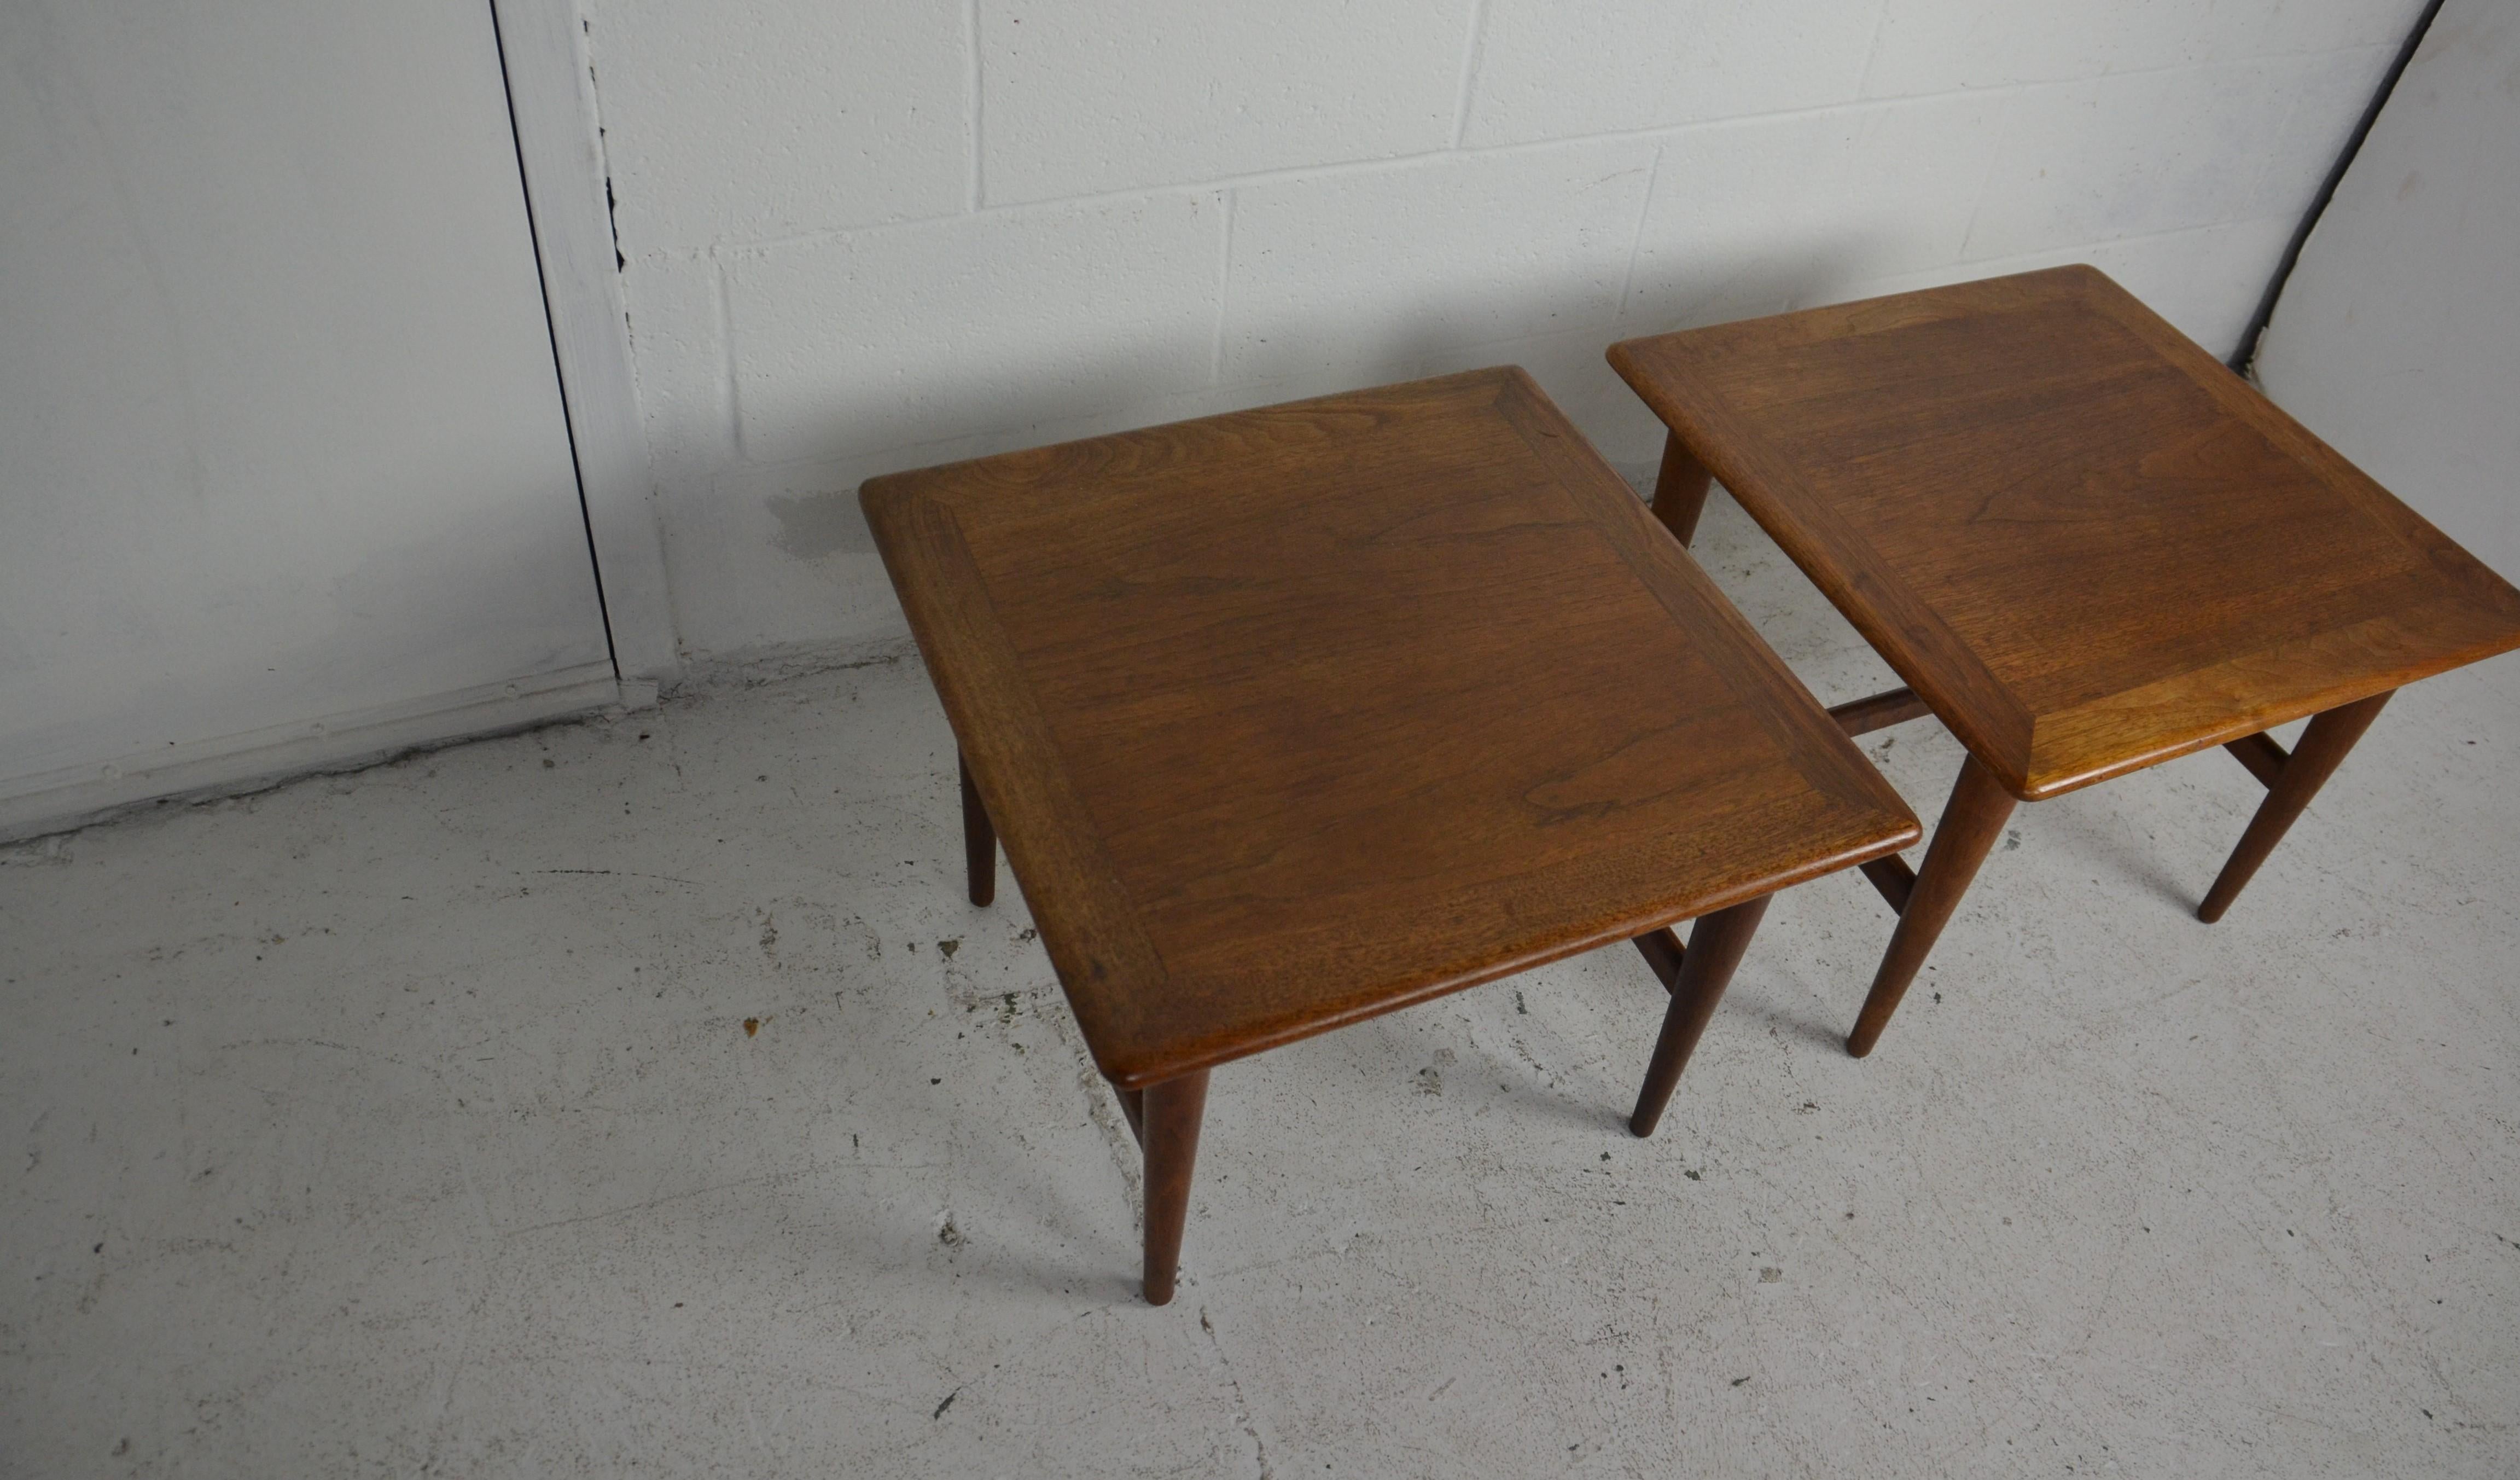 A pair of small size midcentury end tables in teak wood. Tapered legs with 